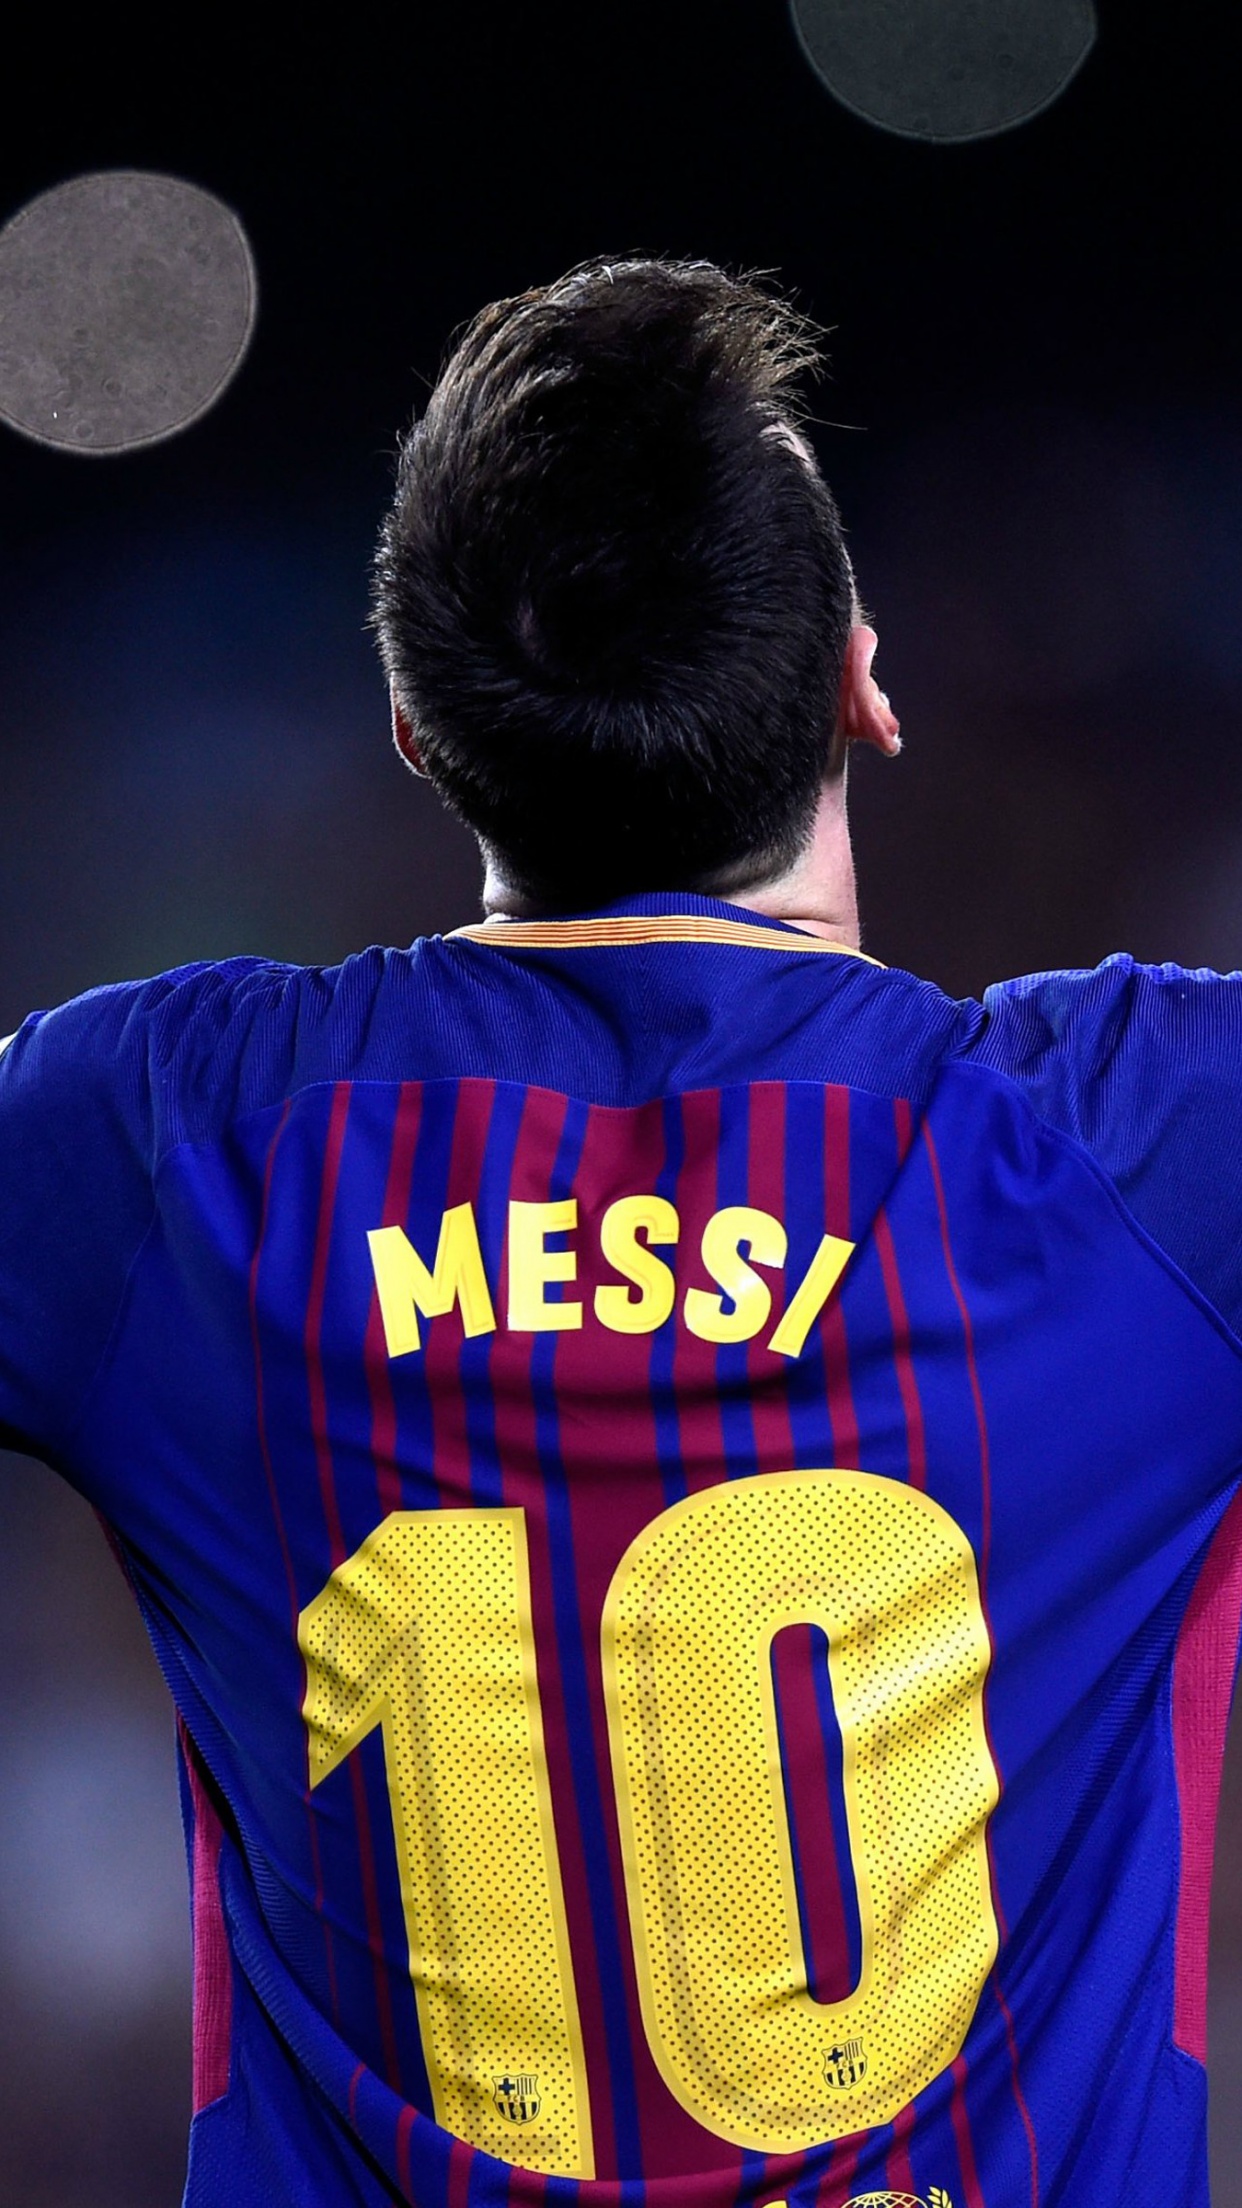 Lionel Messi Wallpaper 4K, Football player, Argentinian, Goal, FC